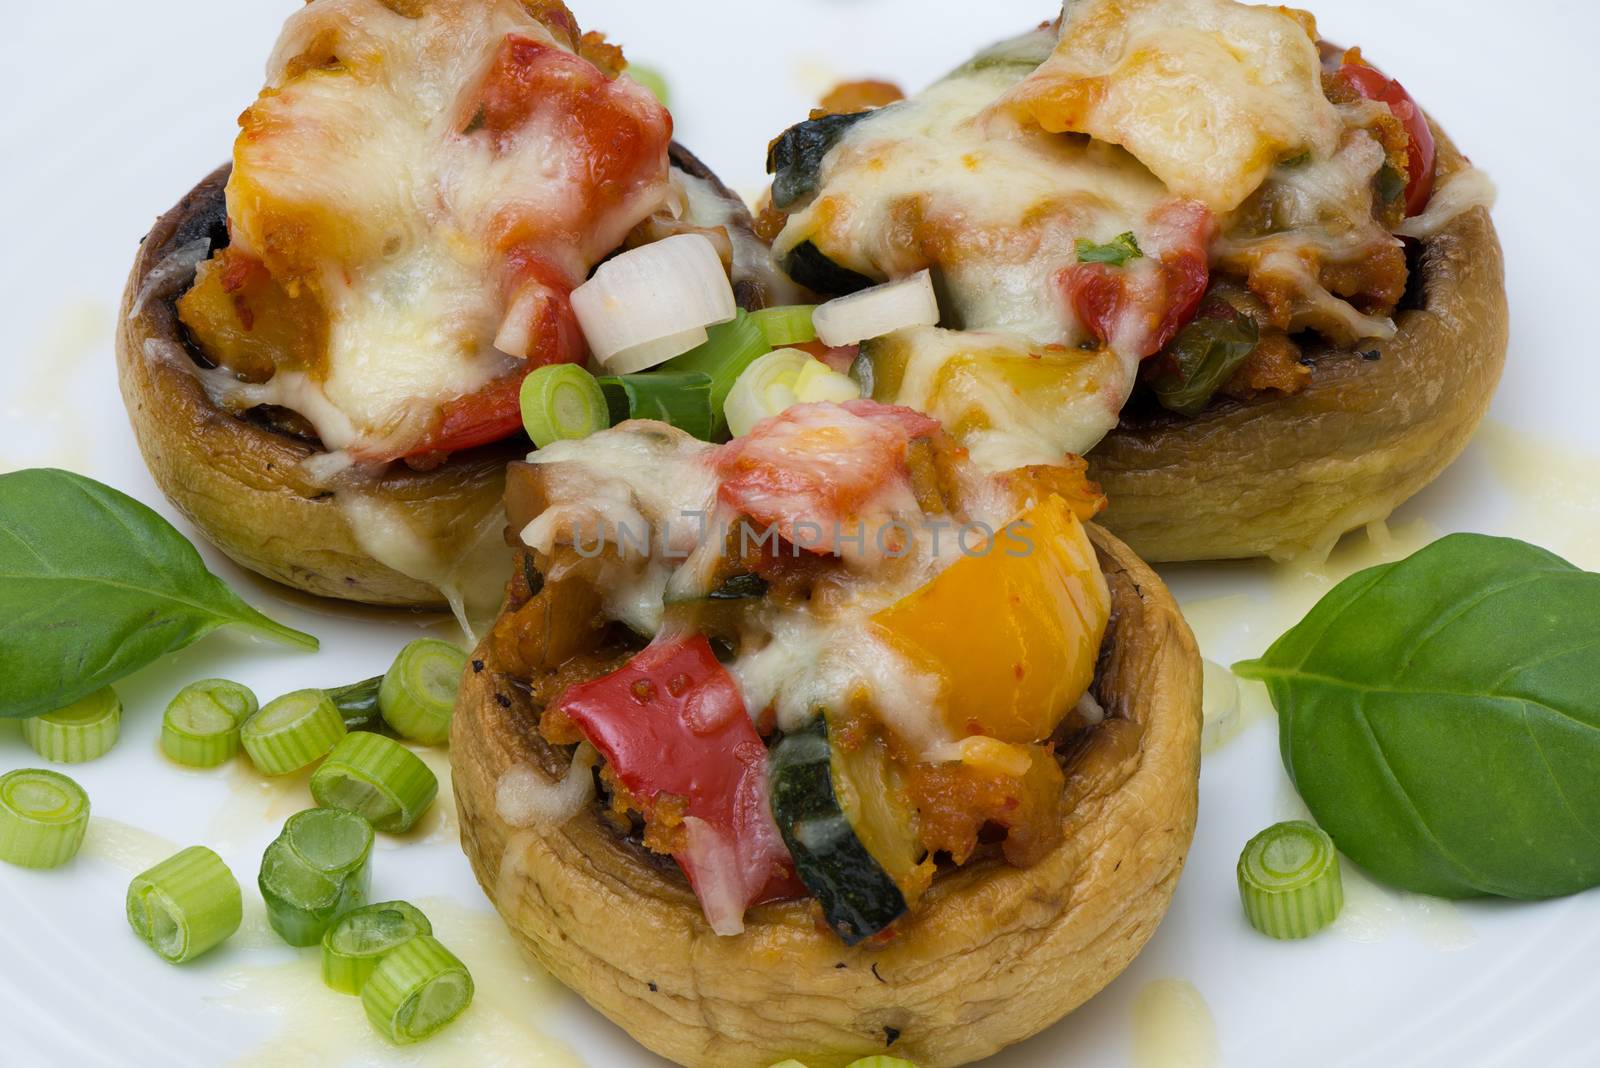 Mushrooms stuffed with vegetables and cheese on white plate fork and knife